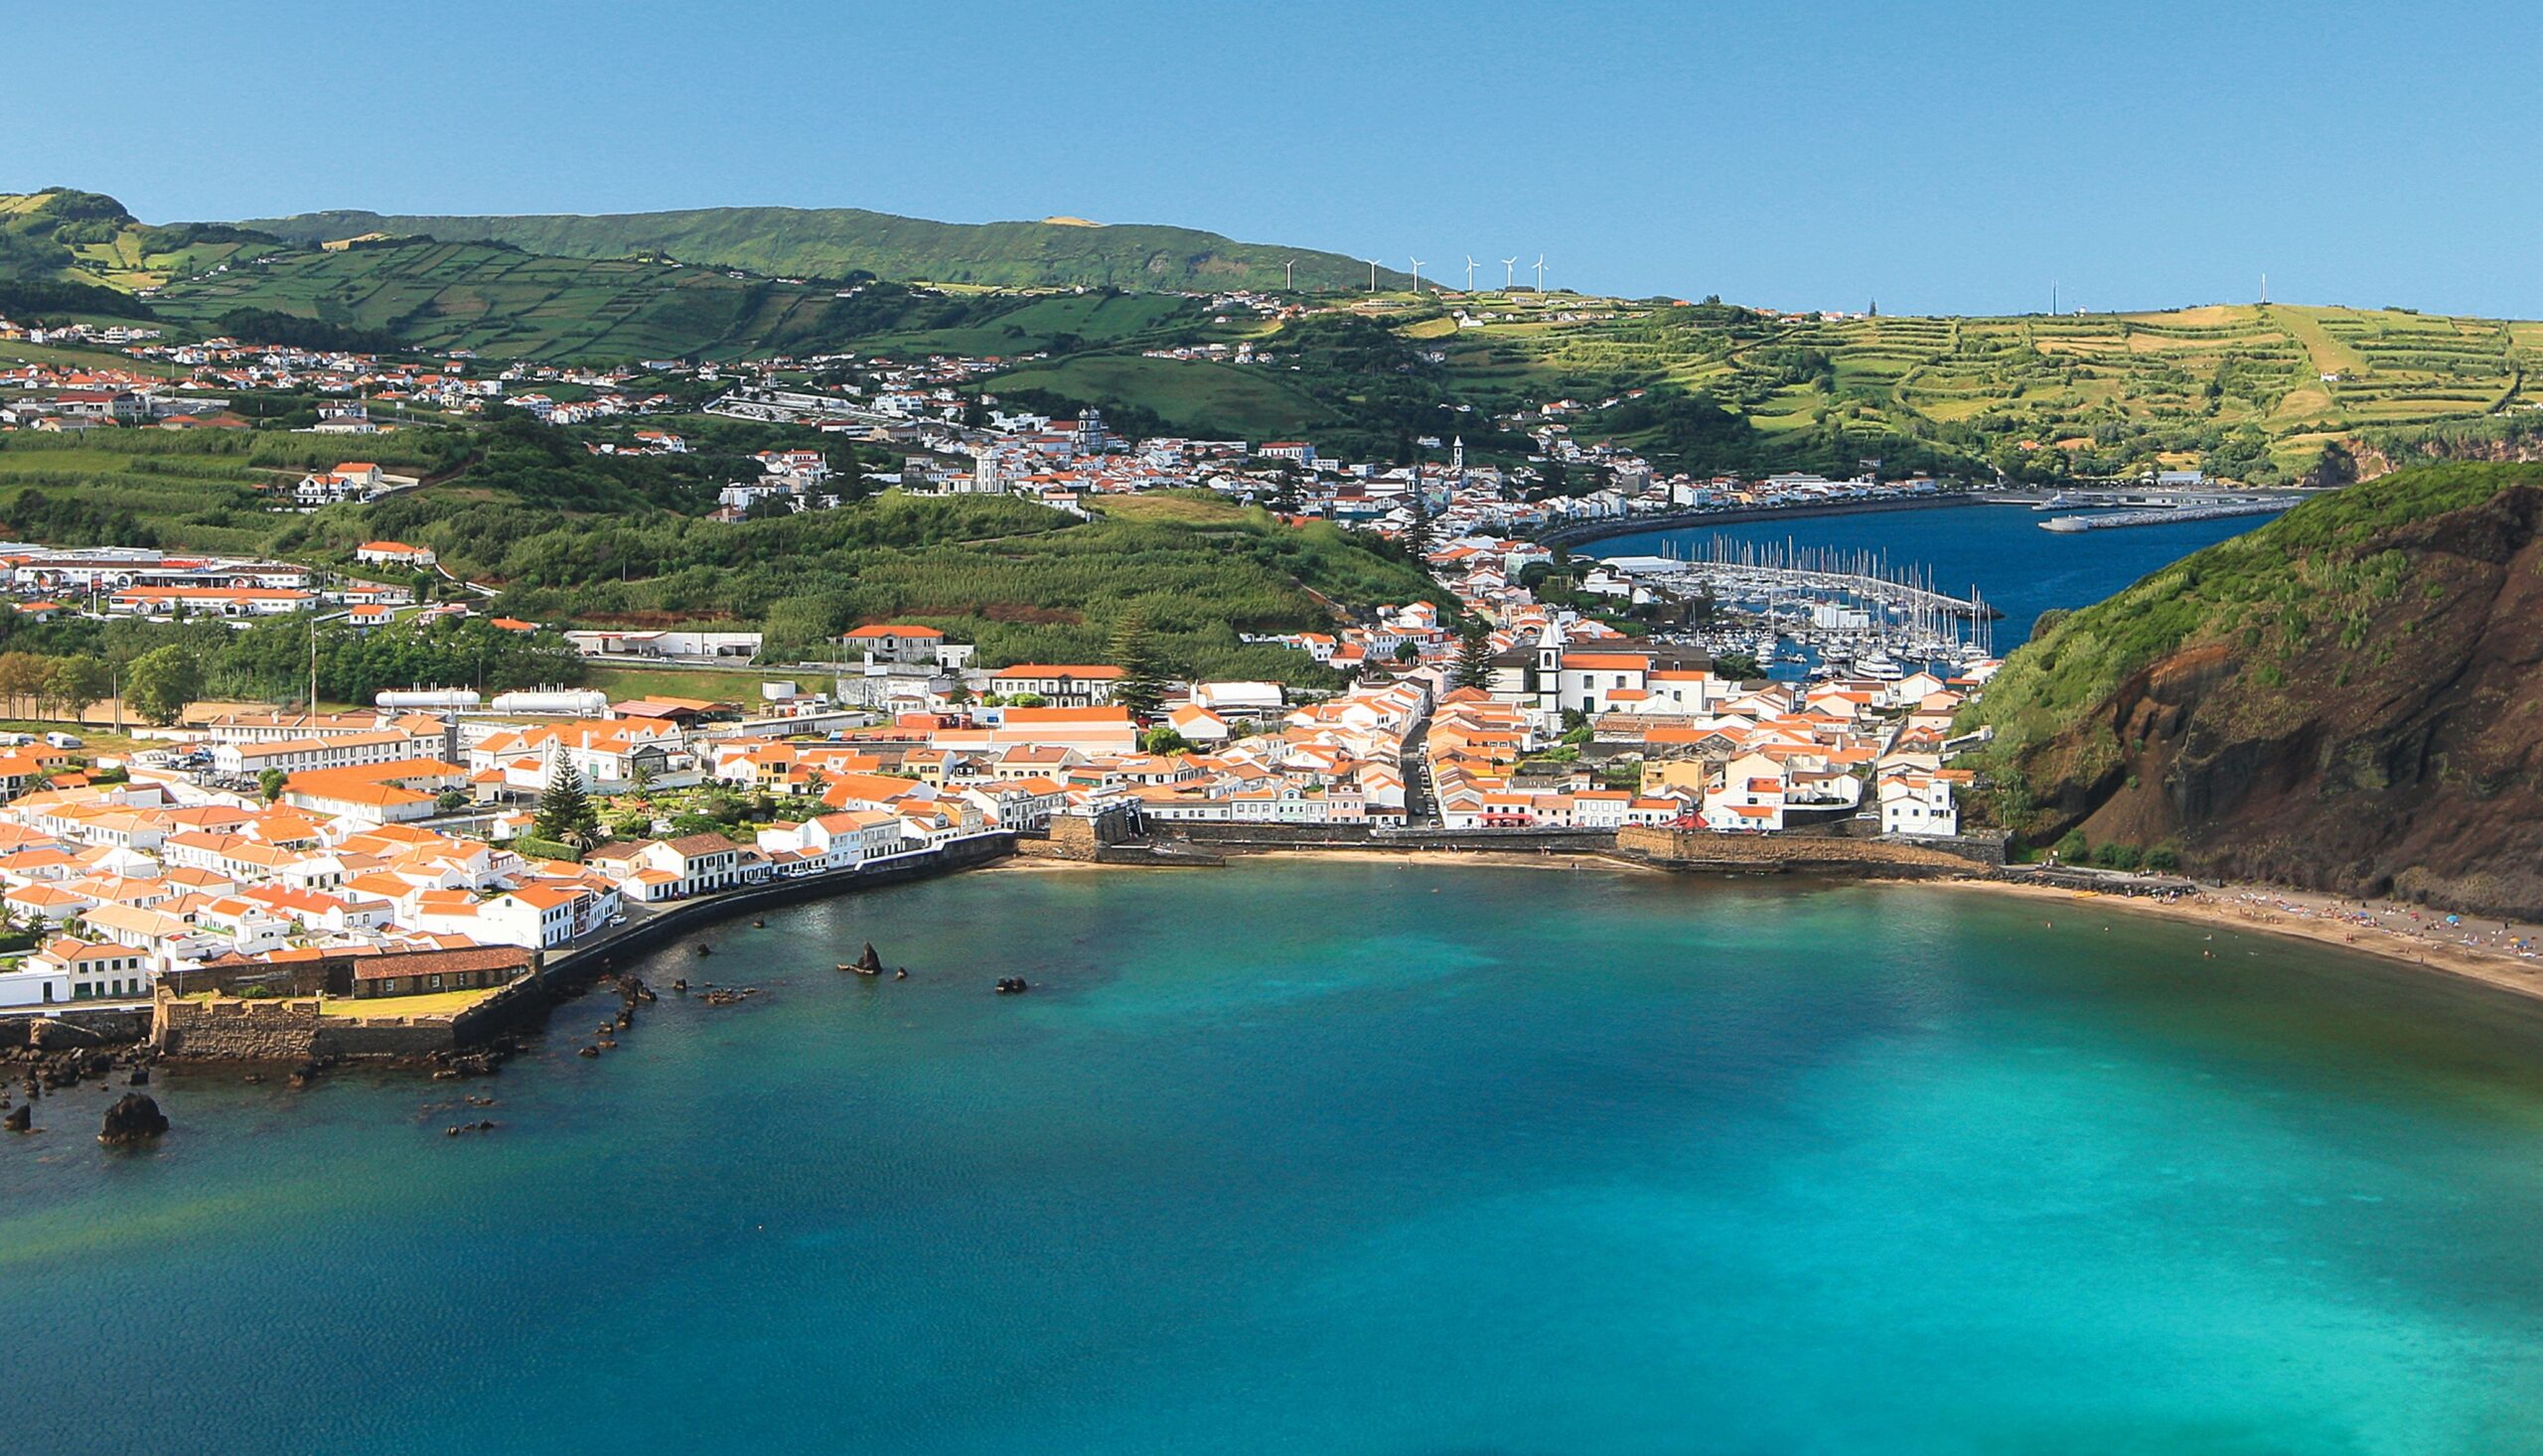 Sao Miguel, Flores and Faial island hopping holiday